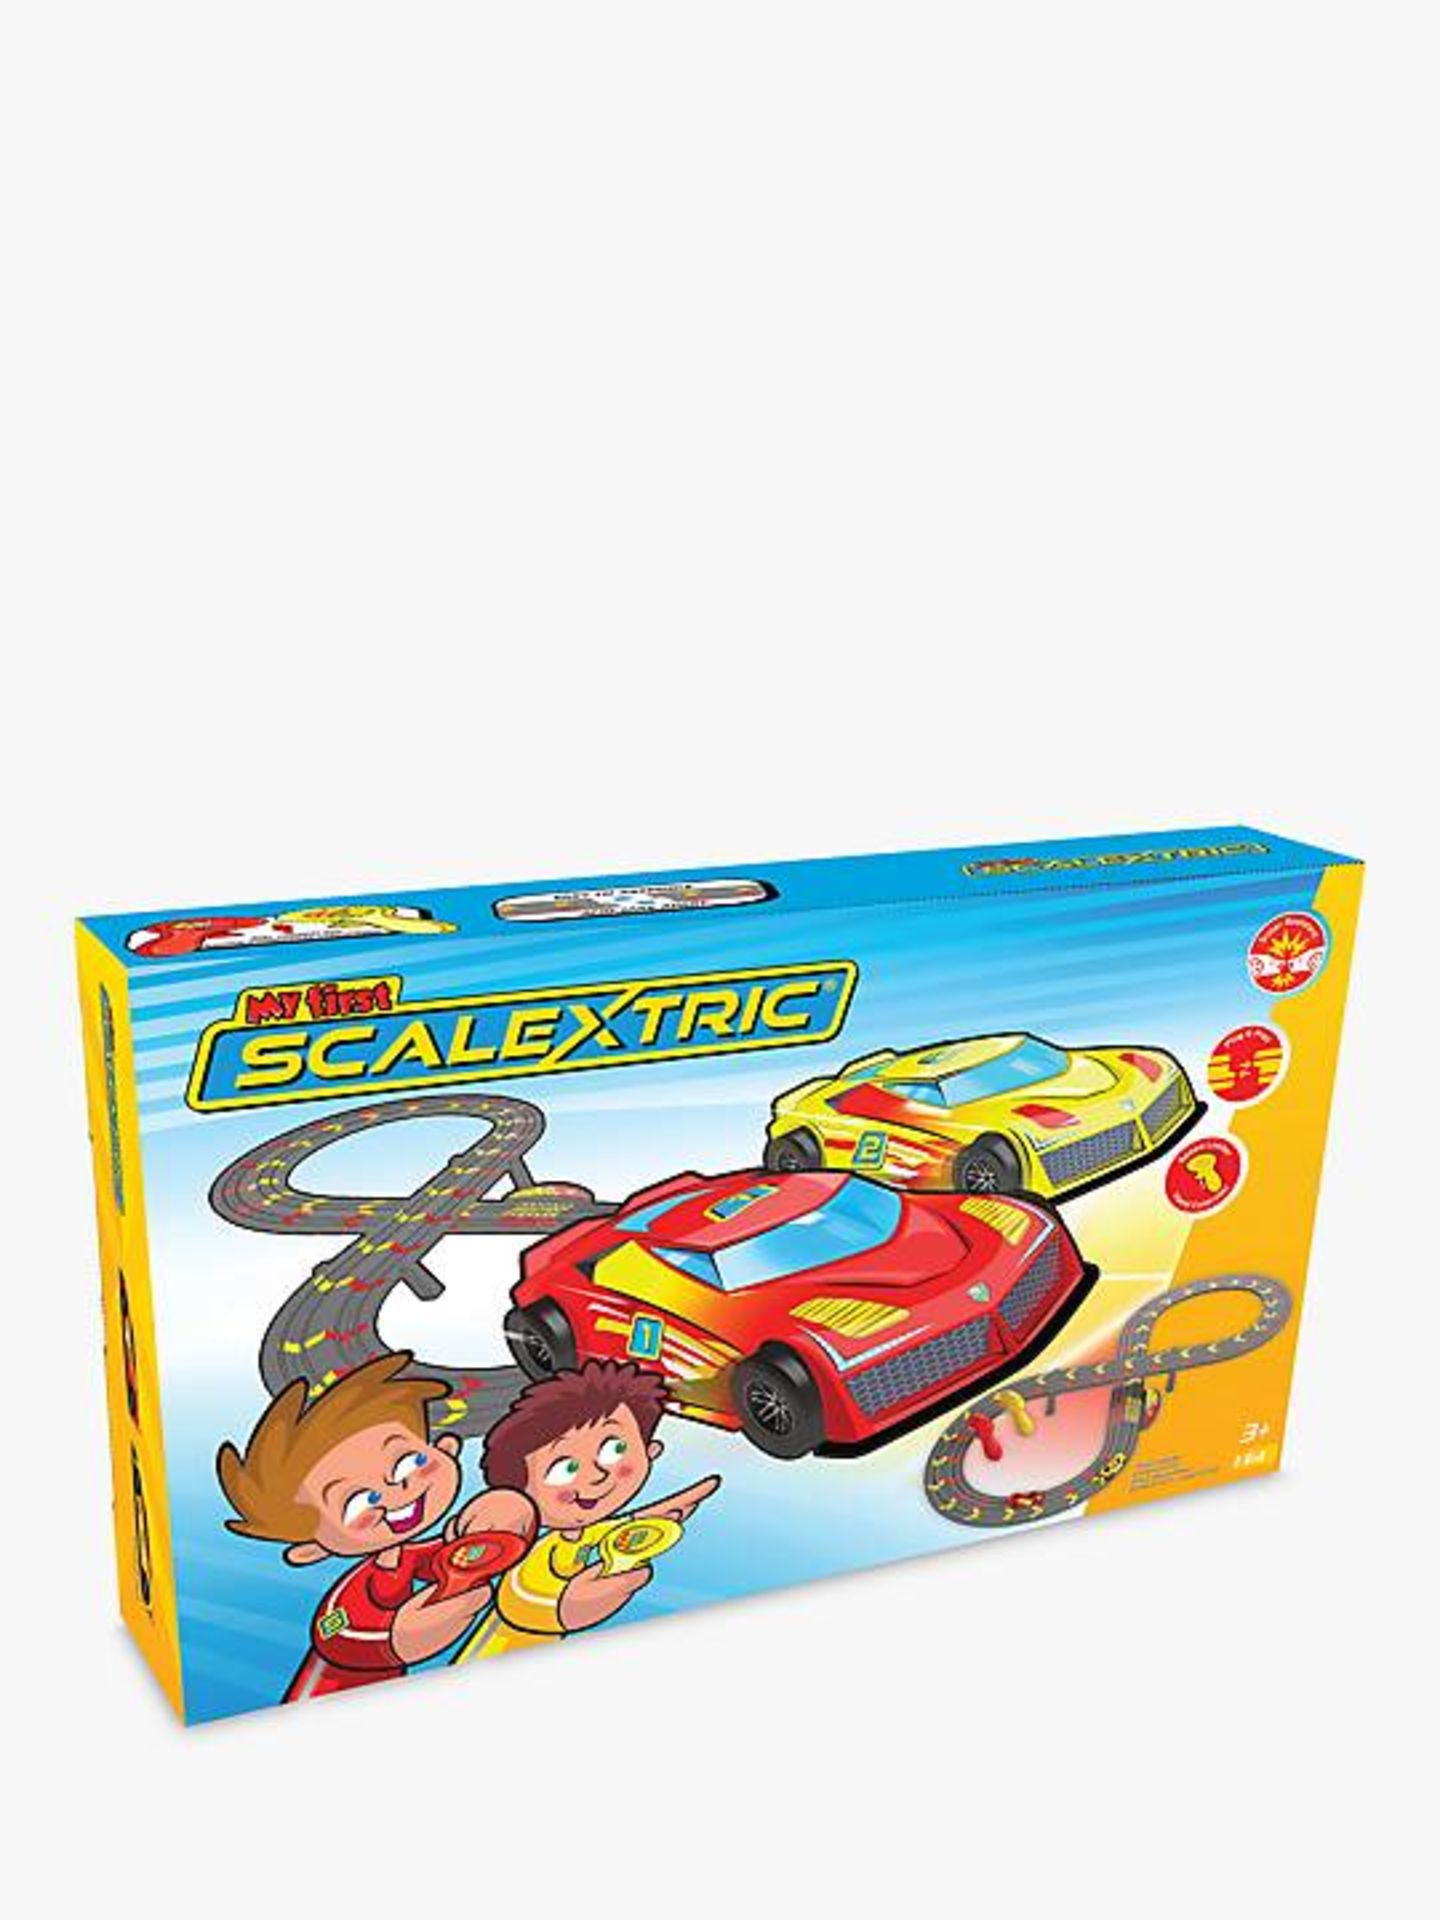 Pallet of Raw Customer Returns - Category - TOYS - P100178492 - Image 30 of 32